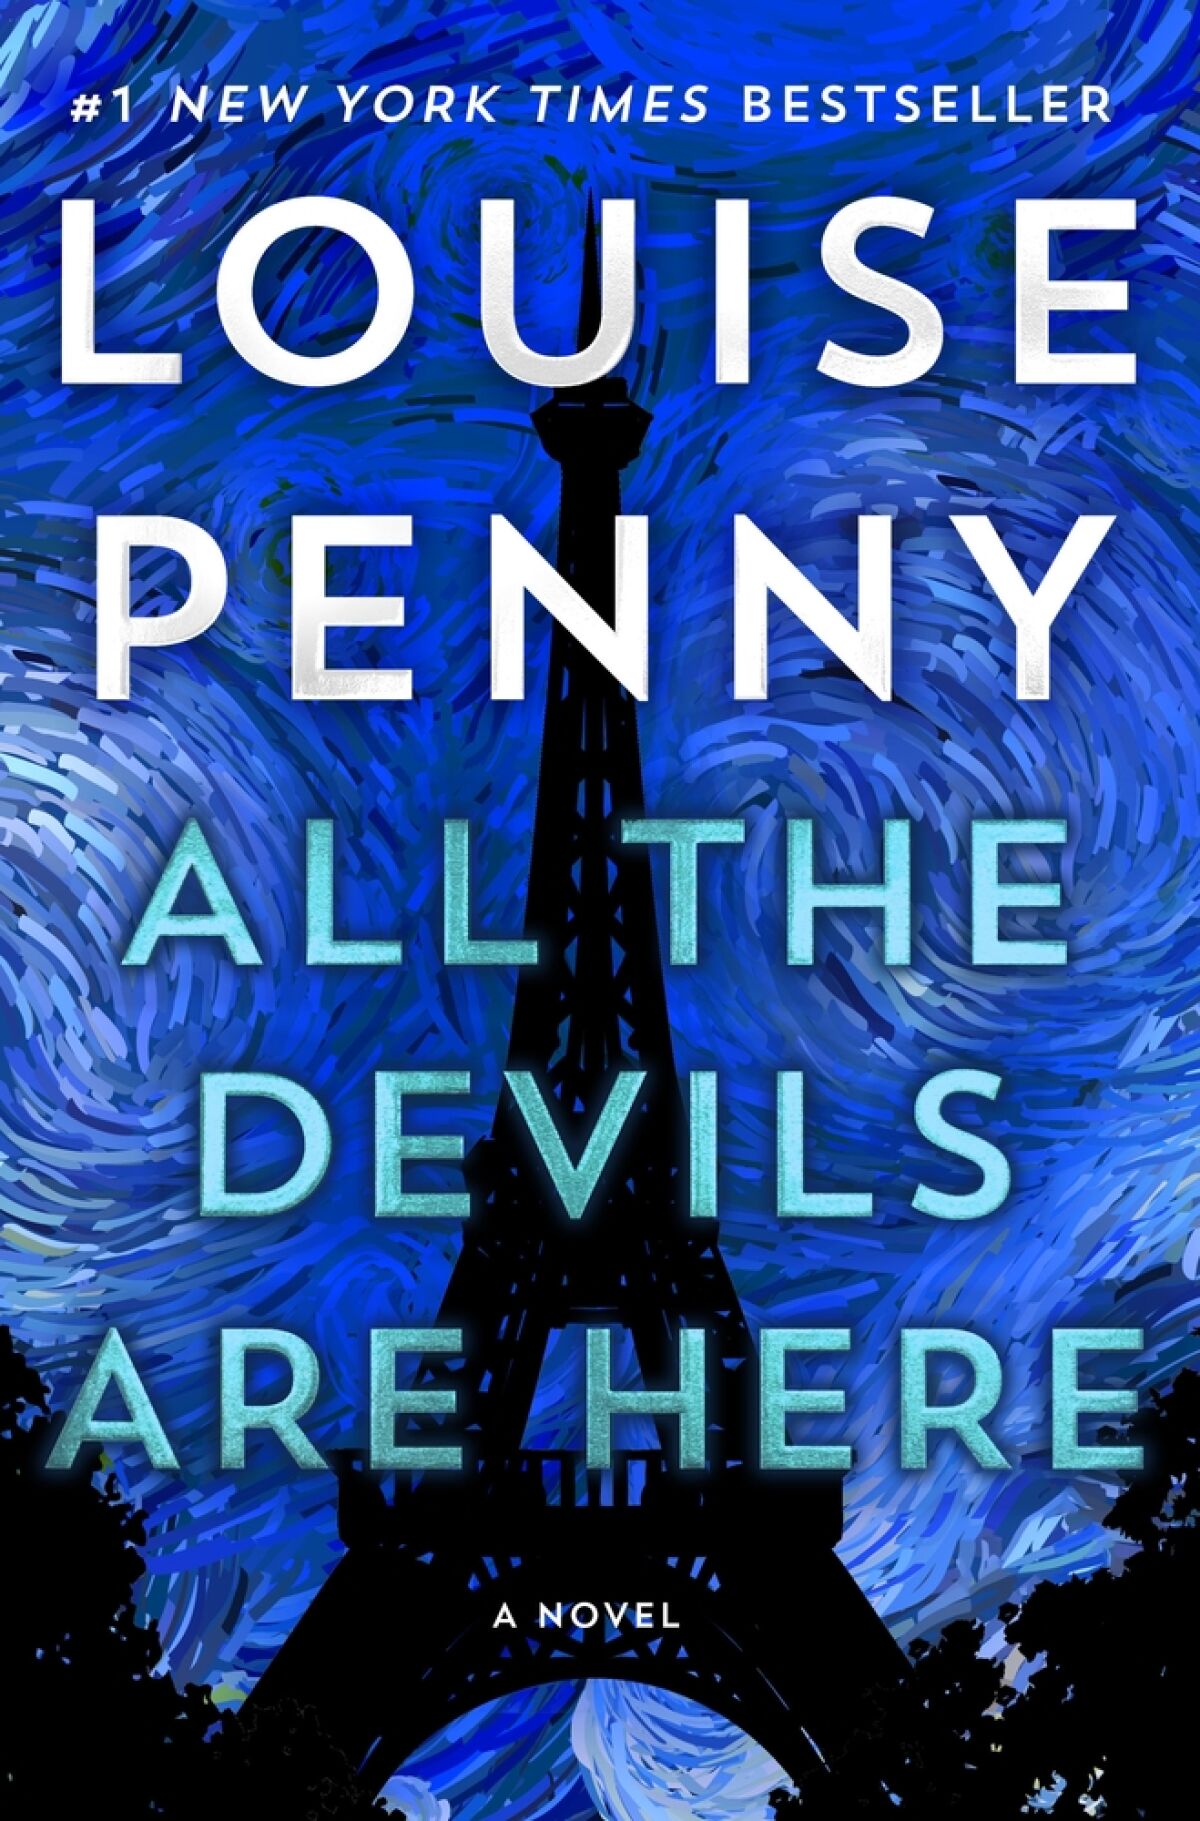 Book jacket for "All the Devils Are Here" by Louise Penny